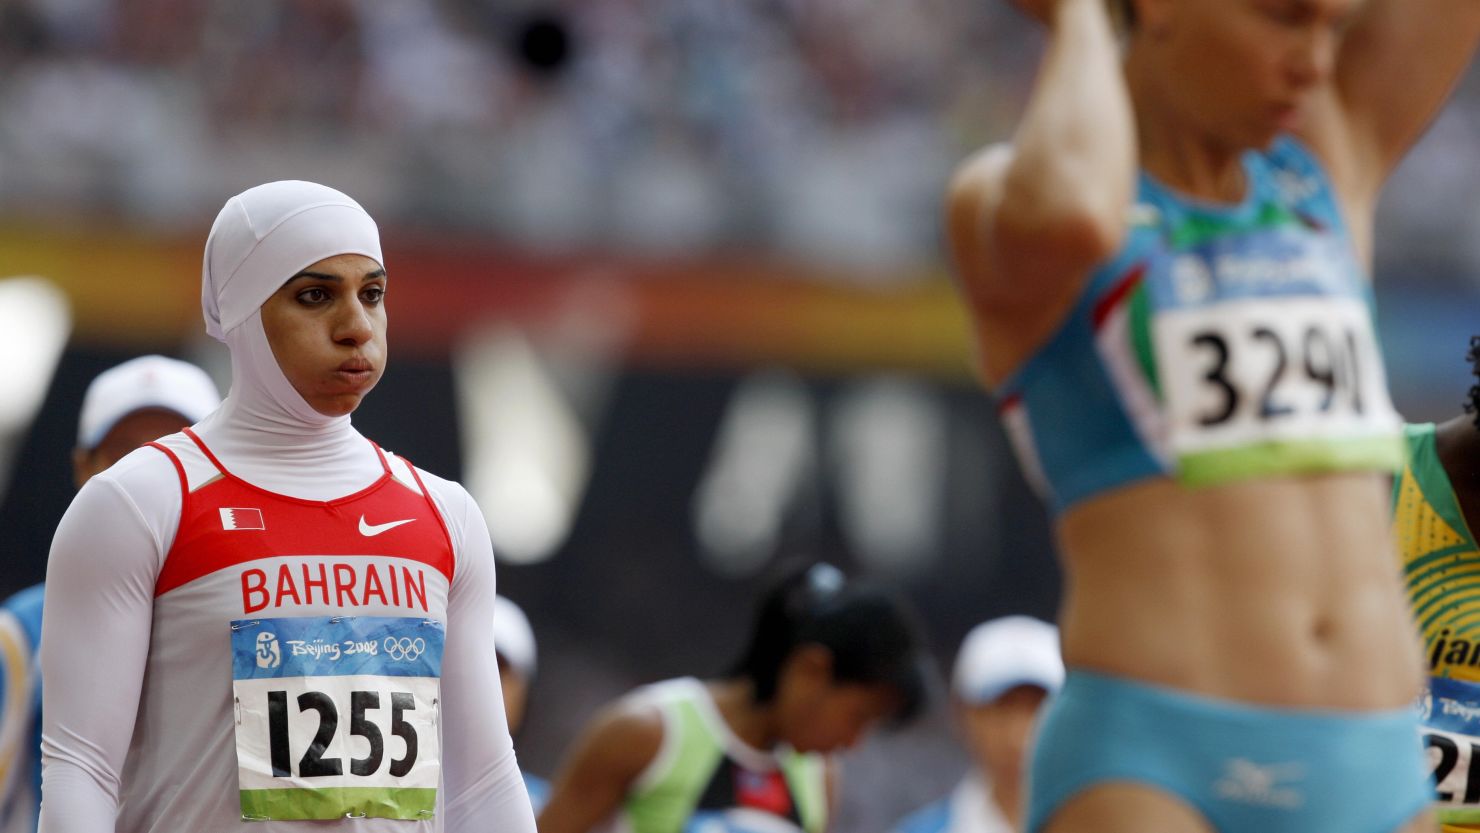 Roqaya Al-Gassra of Bahrain was among the first female athletes to represent her country at Olympics, reaching 200 meters semi-final in Beijing . This month, Inside the Middle East takes a look at sports in the region.